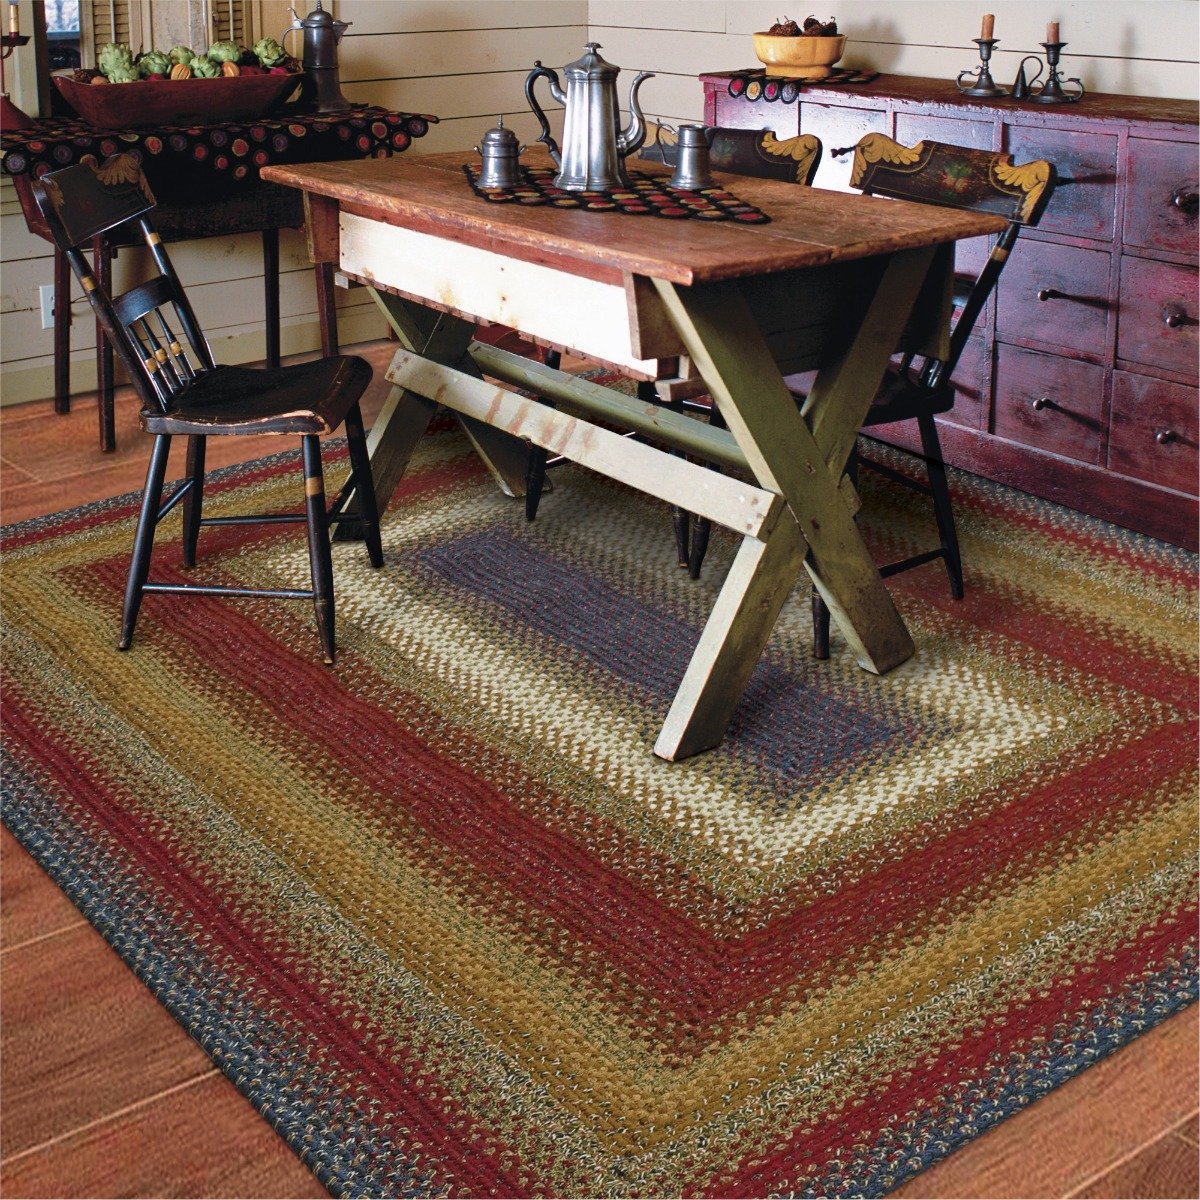 Log Cabin Step Cotton Braided Rugs by Homespice Decor - Lake Erie